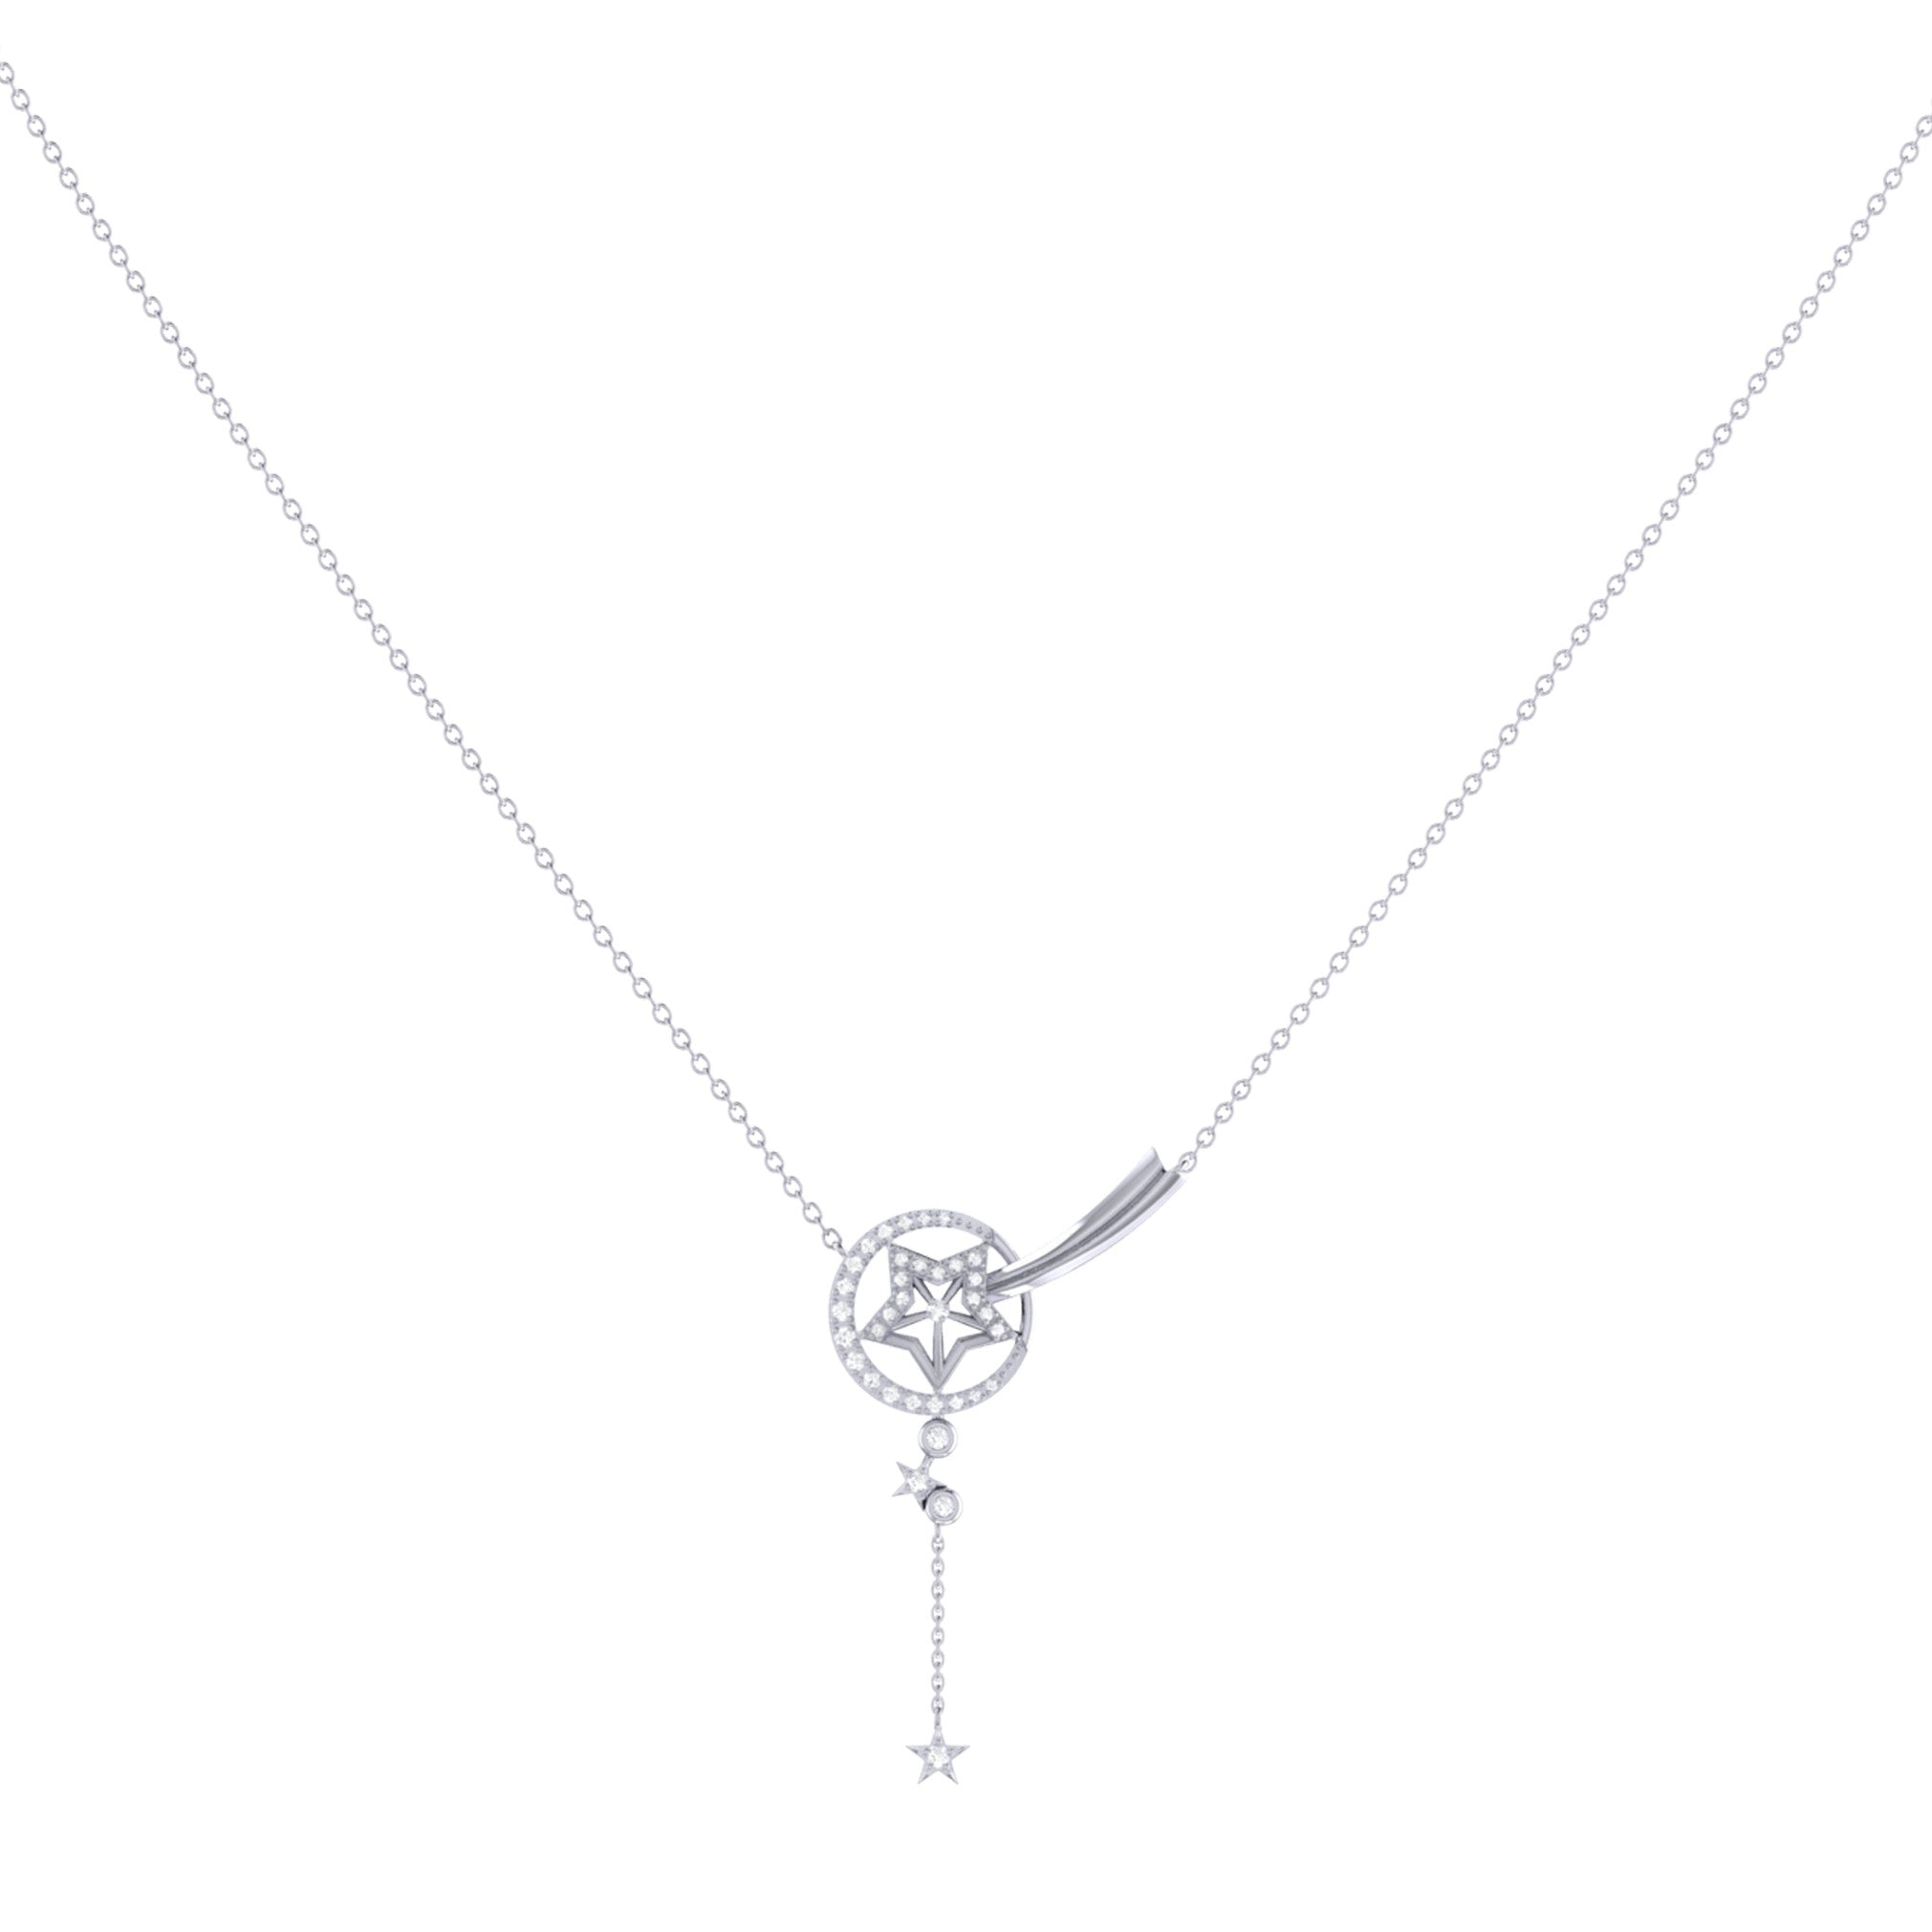 Stella Comet Diamond Drop Necklace in Sterling Silver - Jewelry & Watches - Bijou Her -  -  - 